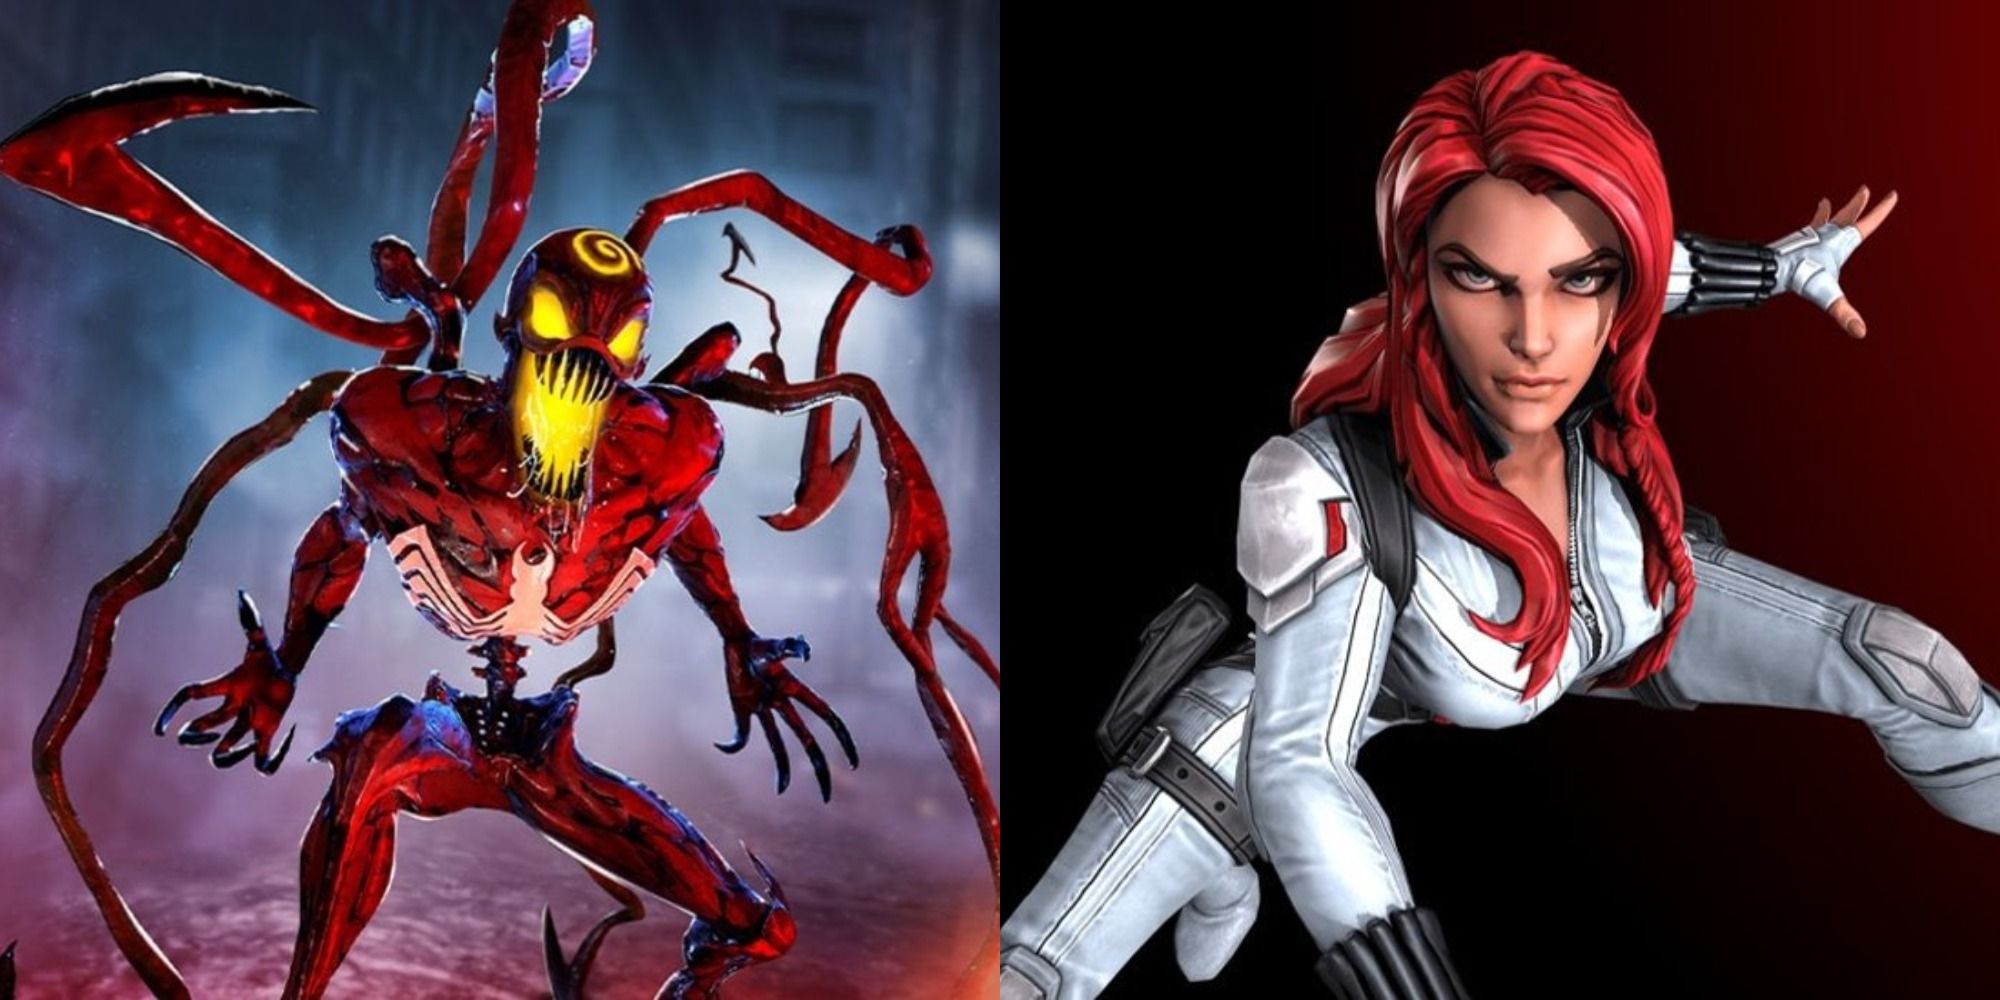 10 Most Obscure Characters That Are Unlockable In Marvel Strike Force